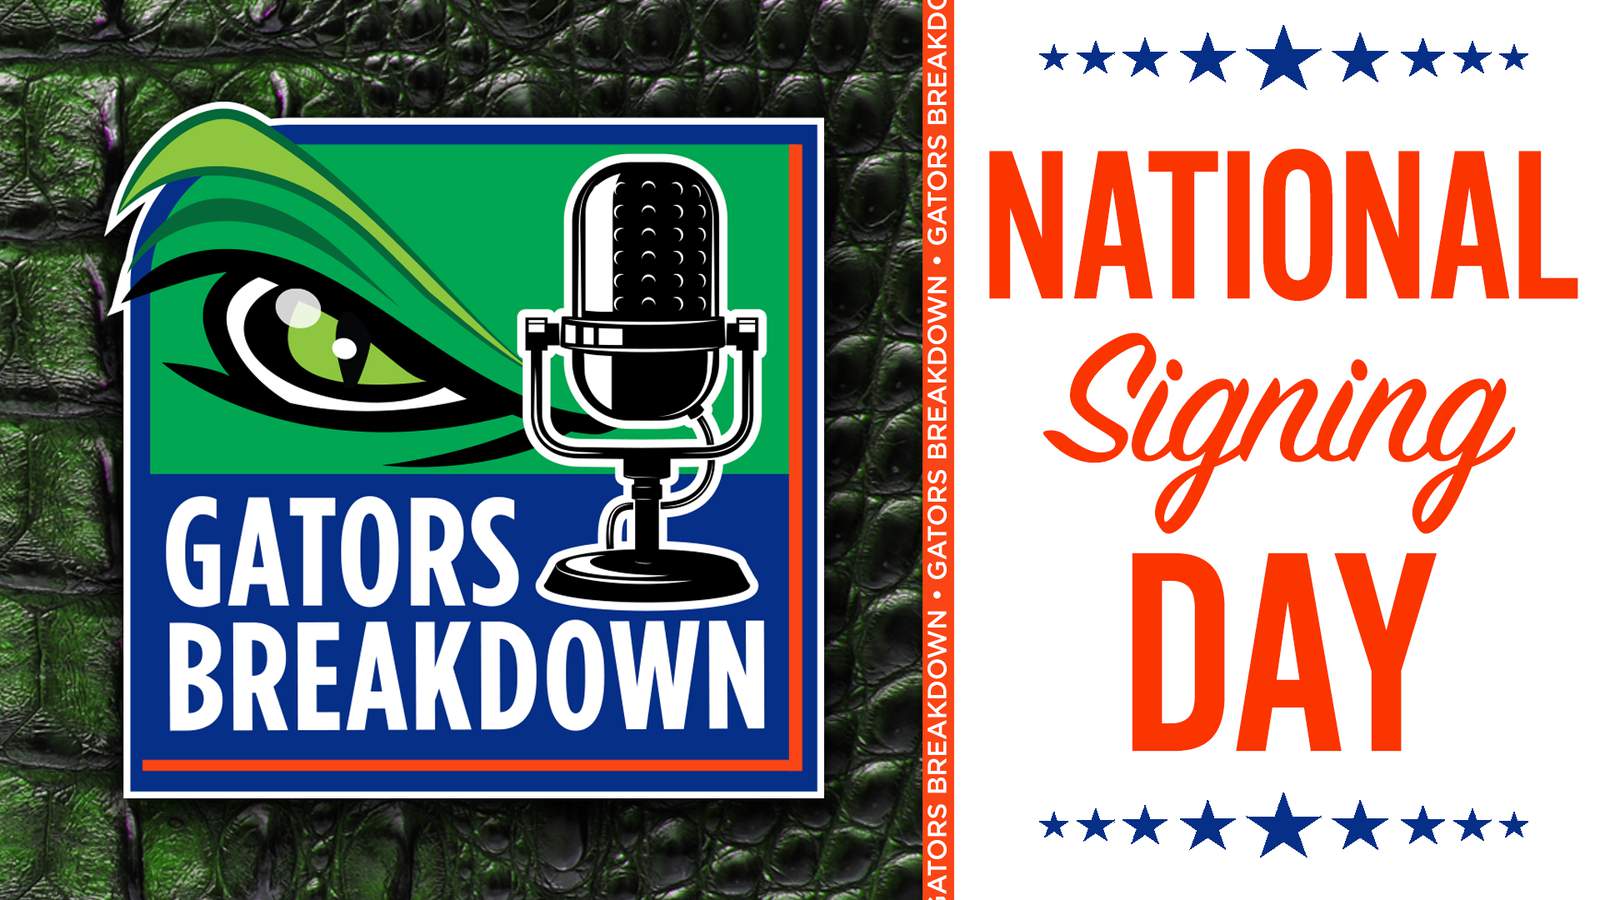 Gators Breakdown: National Signing Day 2021 Review